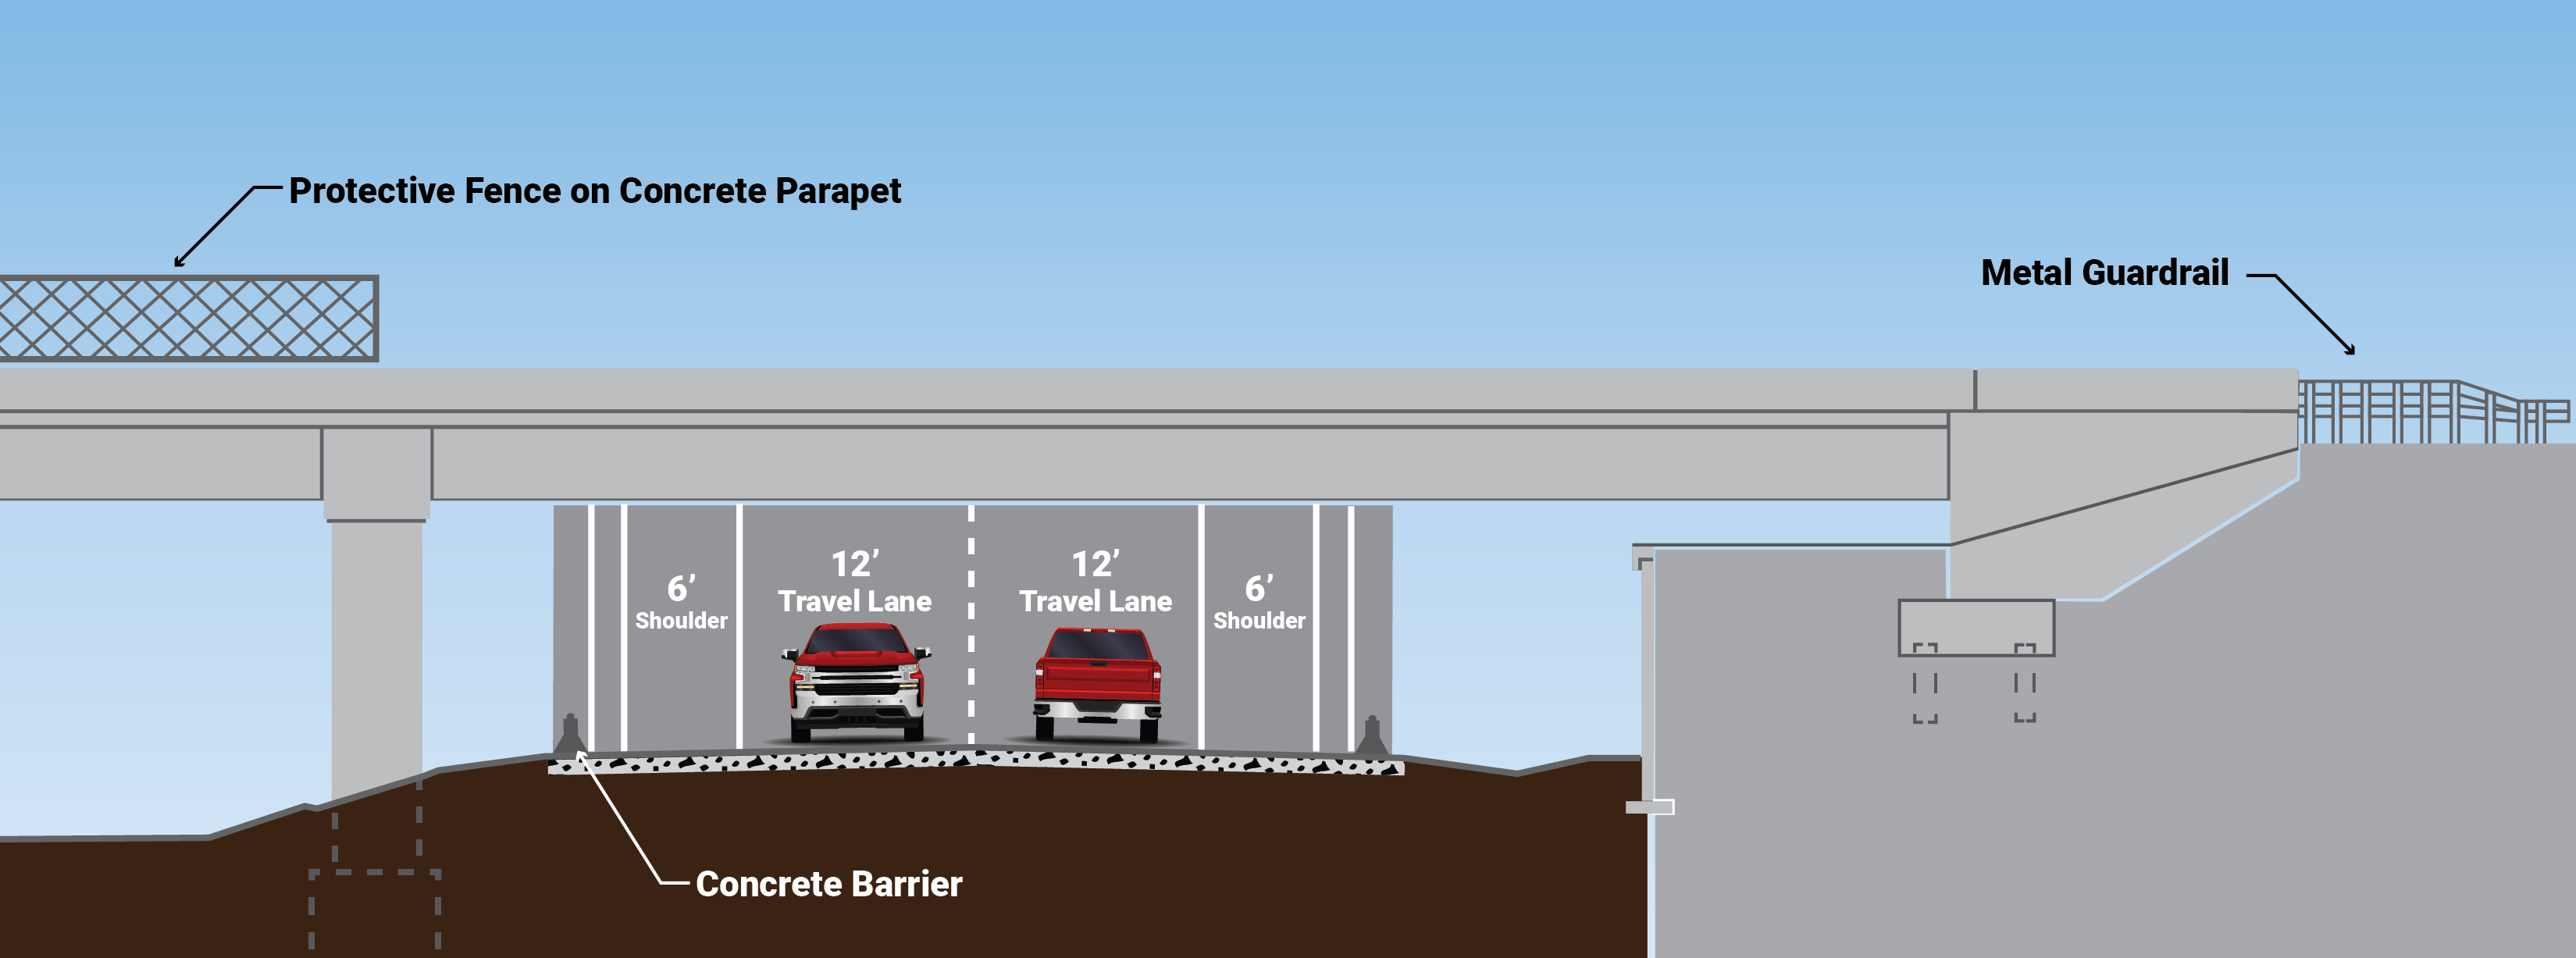 Proposed I-15 Typical Cross sections for Old Highway 91 under Interstate 15 bridge: two, twelve-foot travel lanes flanked by 6 foot shoulder lanes and concrete barriers on each side.